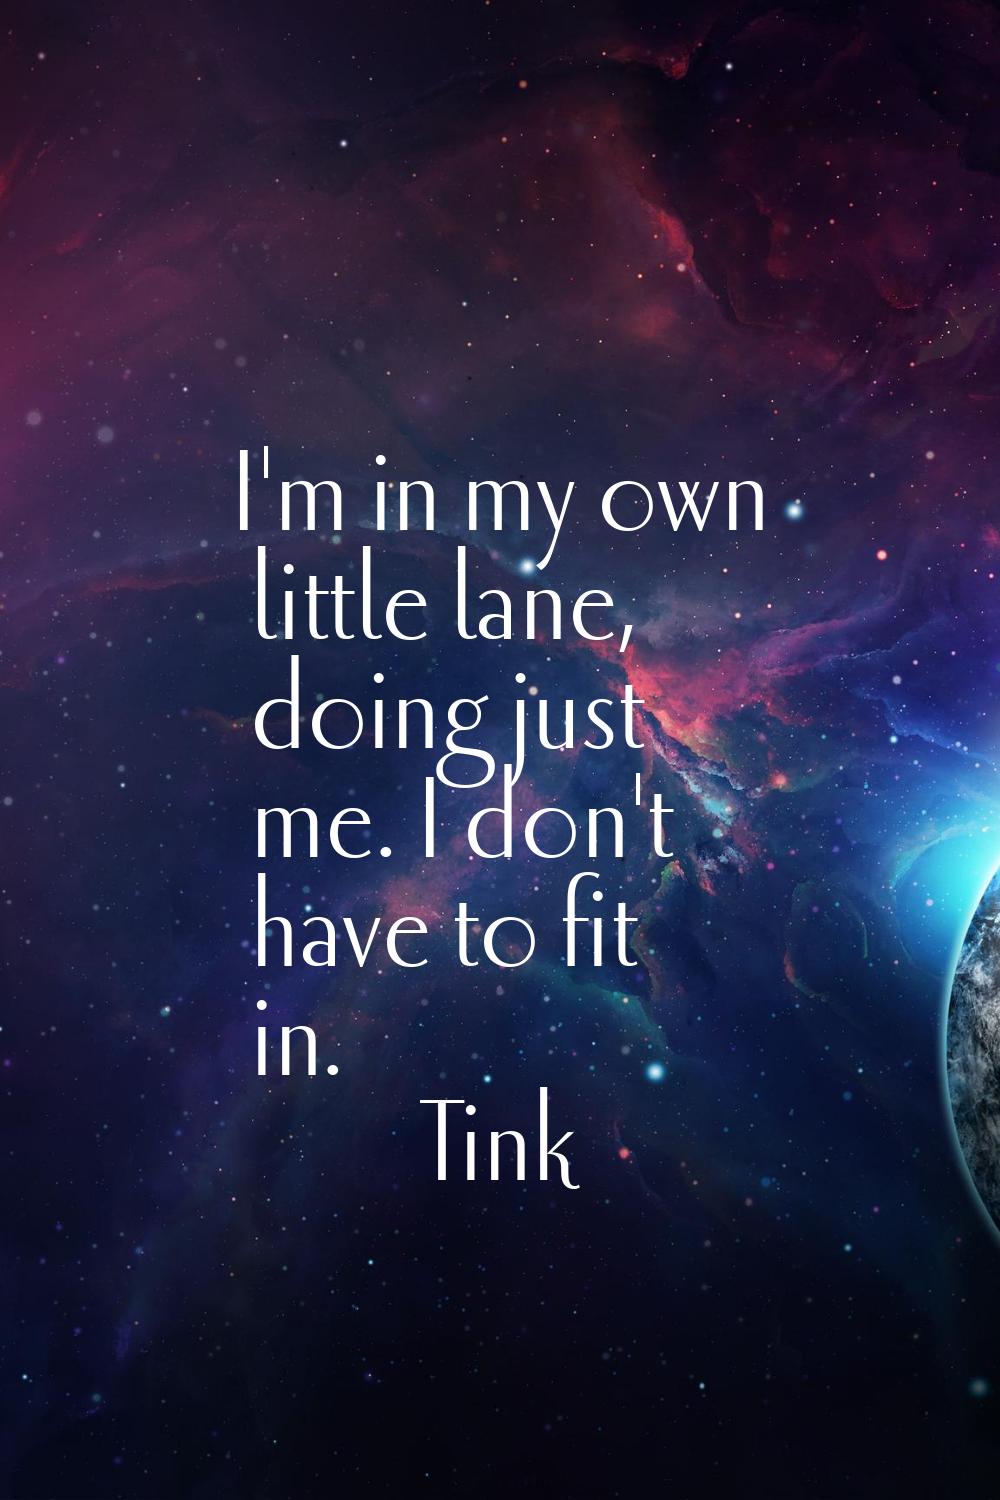 I'm in my own little lane, doing just me. I don't have to fit in.